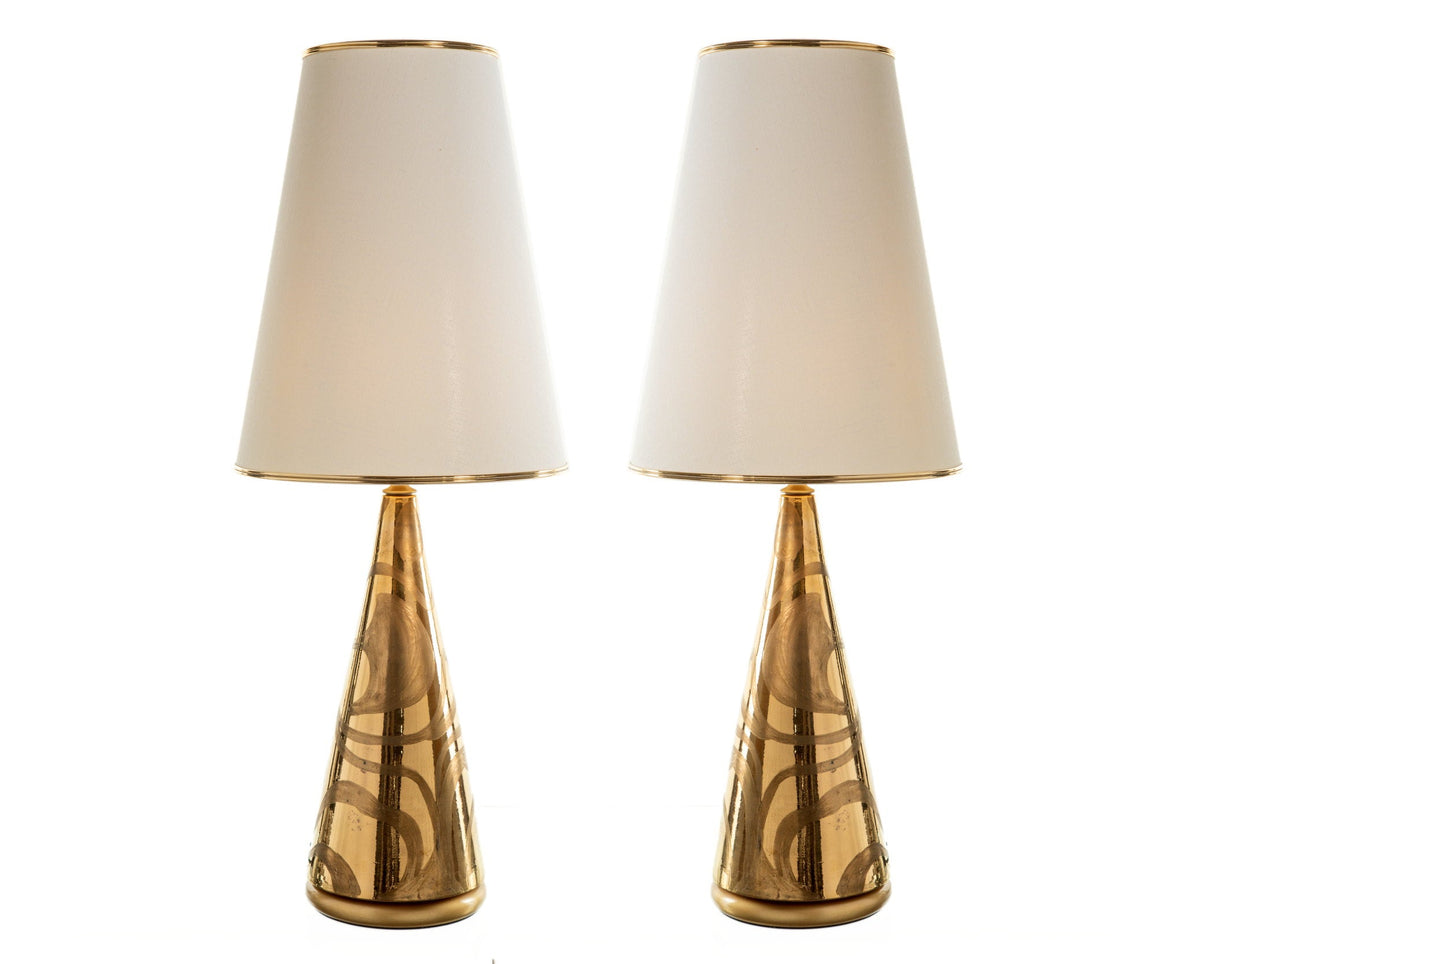 Pair of table lamps from the 70s